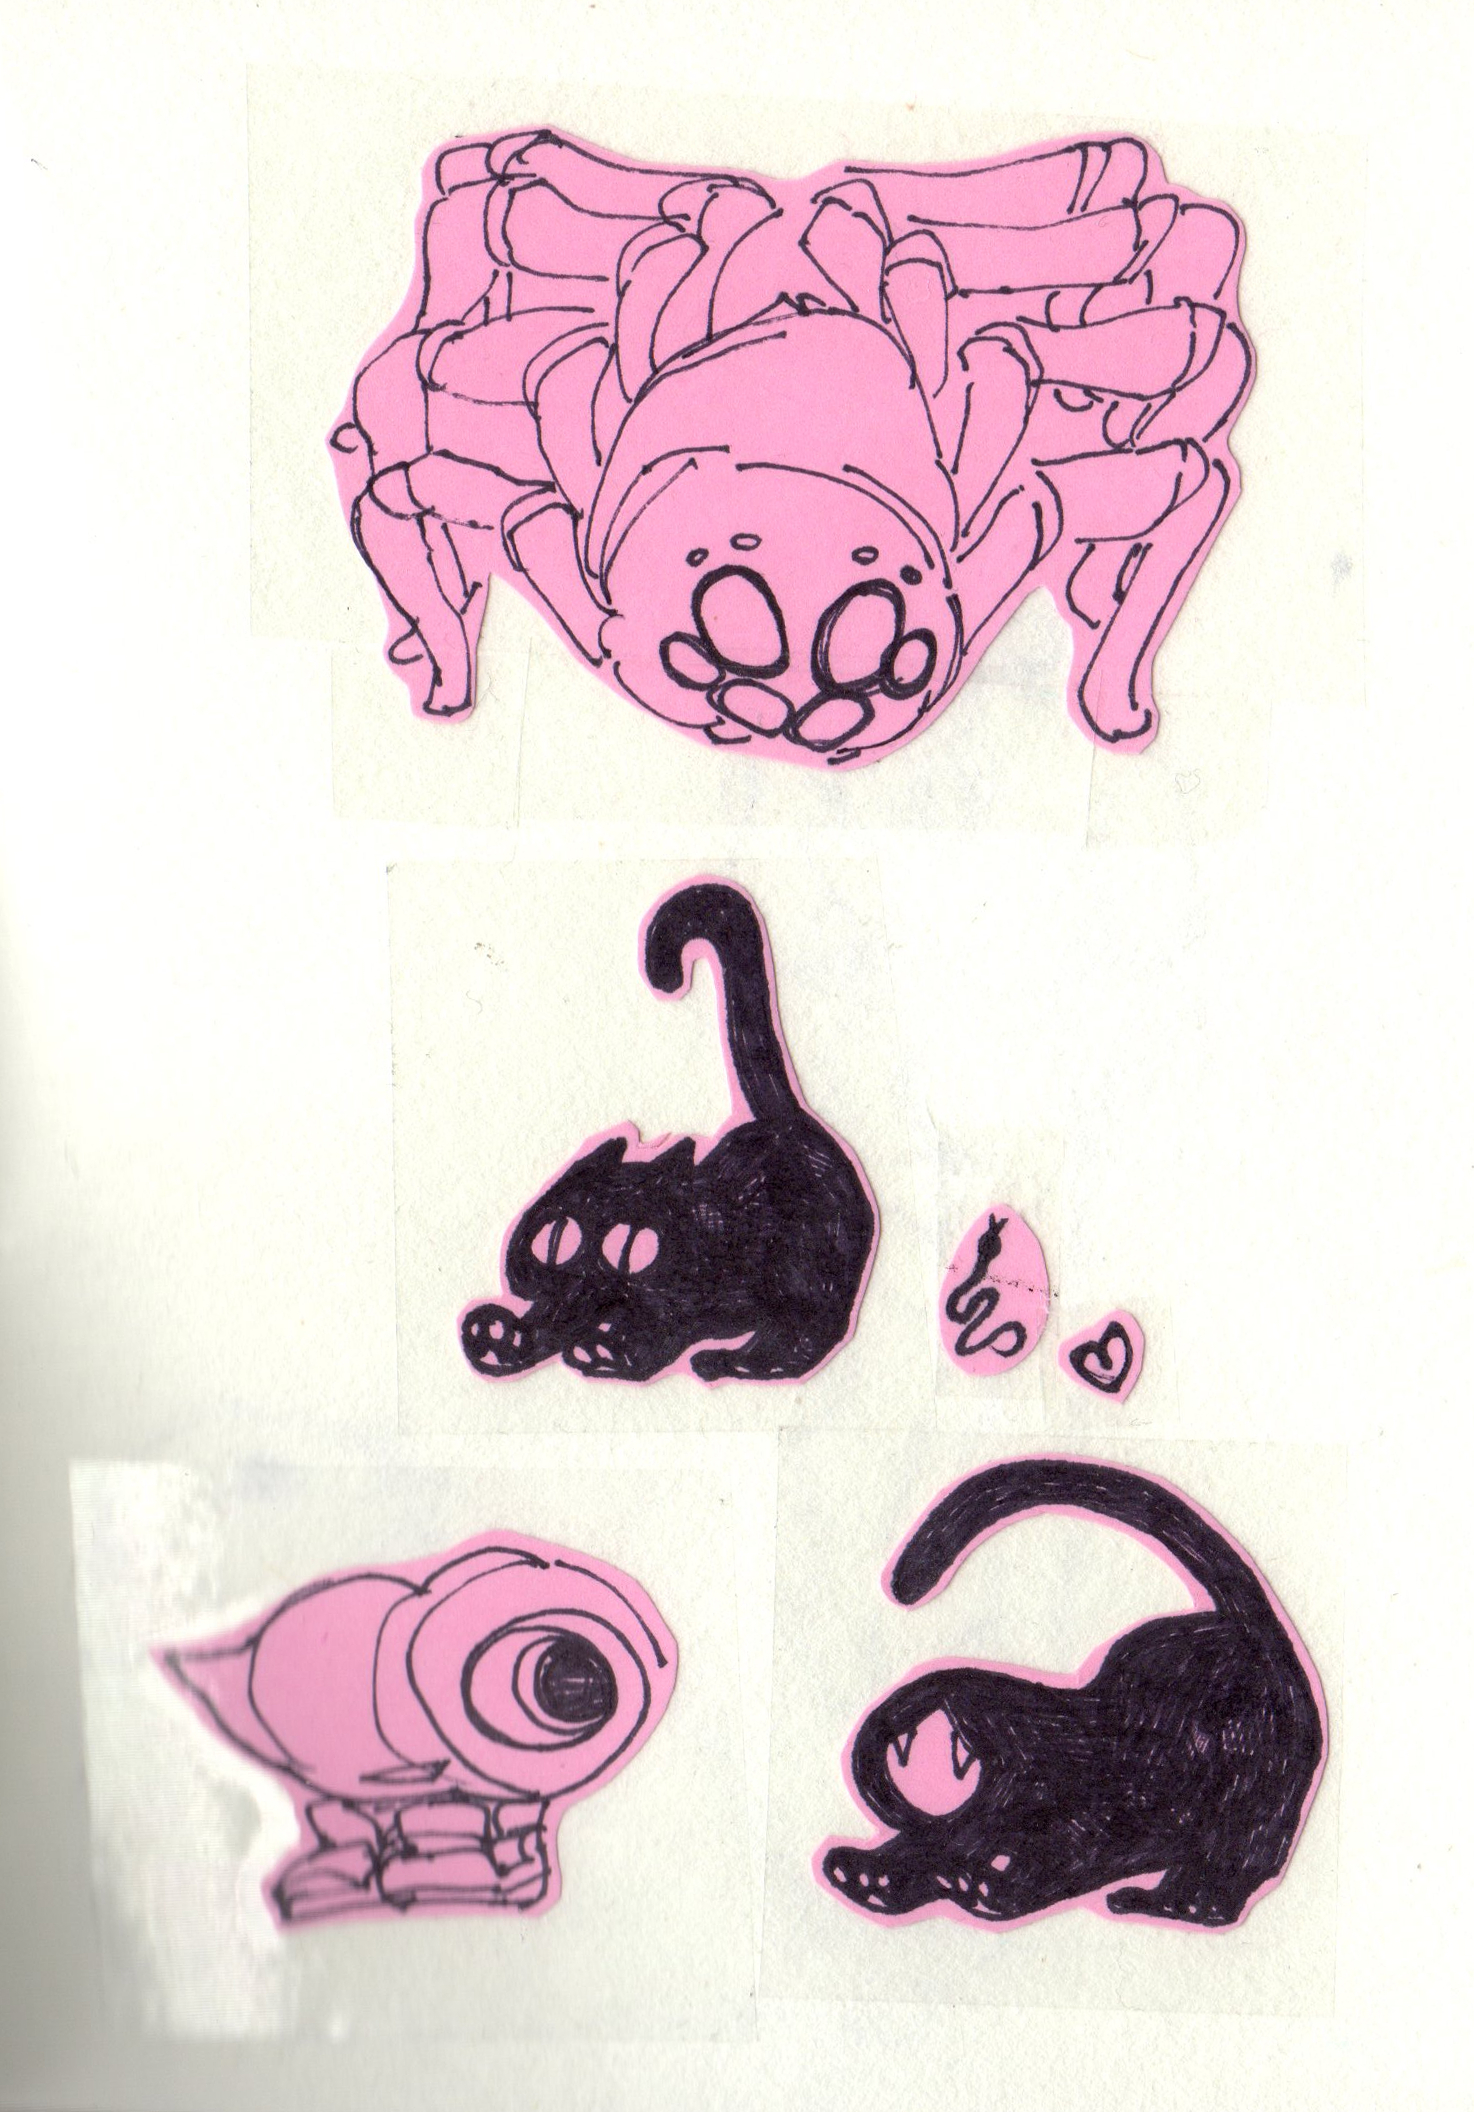 Cats, a Spider, and Marcel the Shell (with Shoes On)